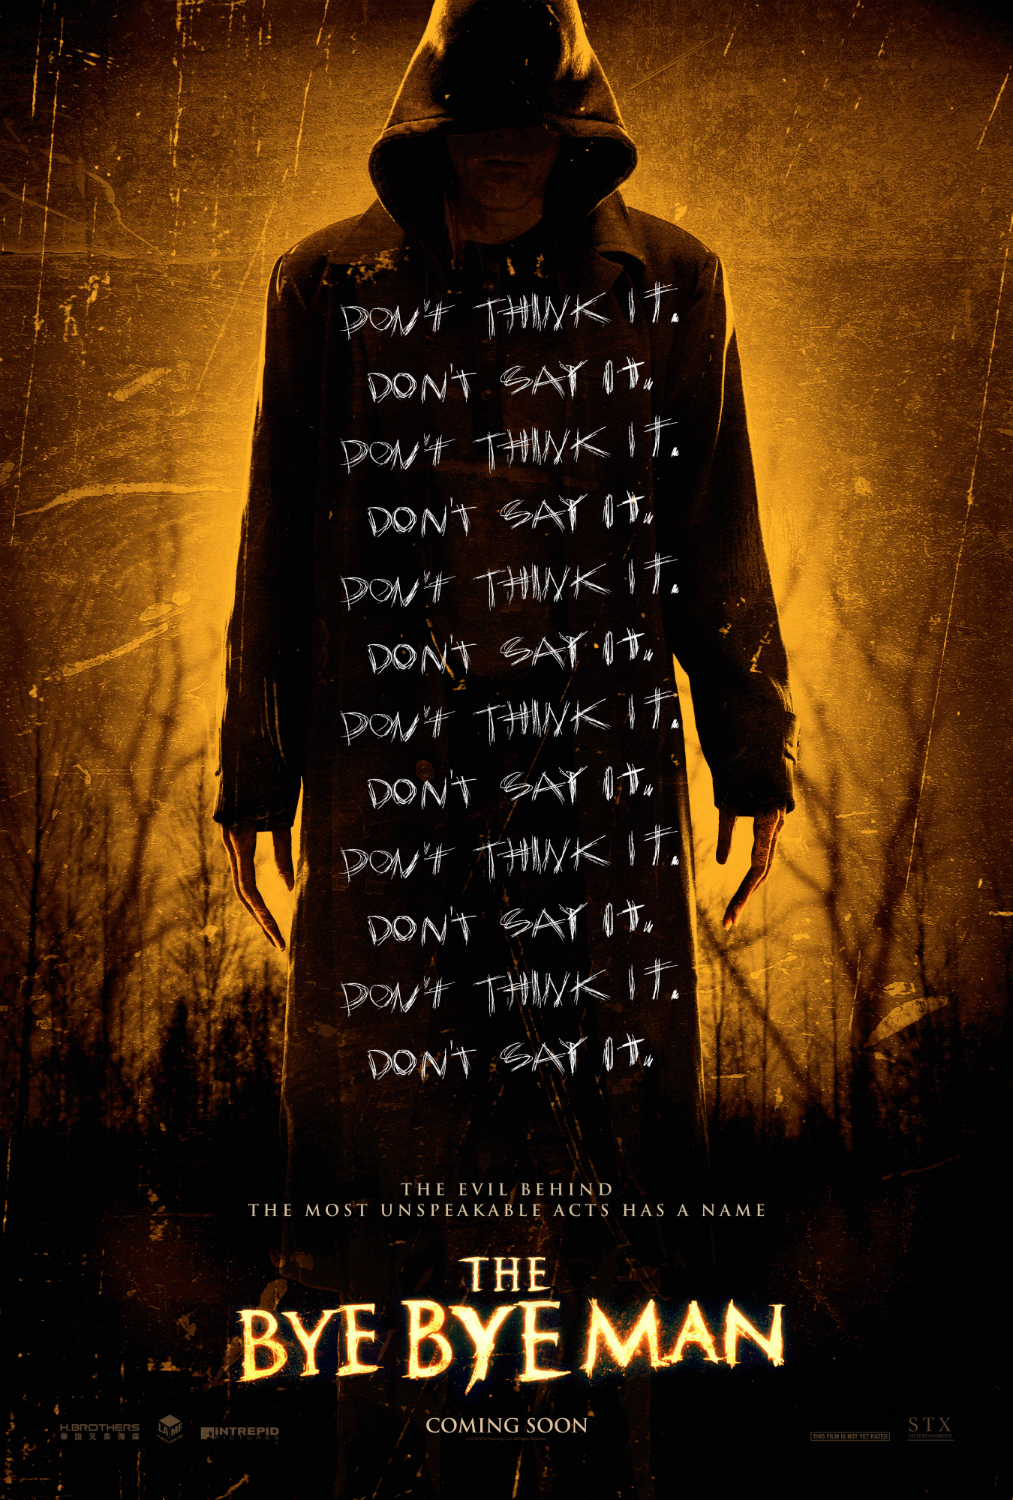 The Bye Bye Man Trailer – Don’t Say It Don’t Think It